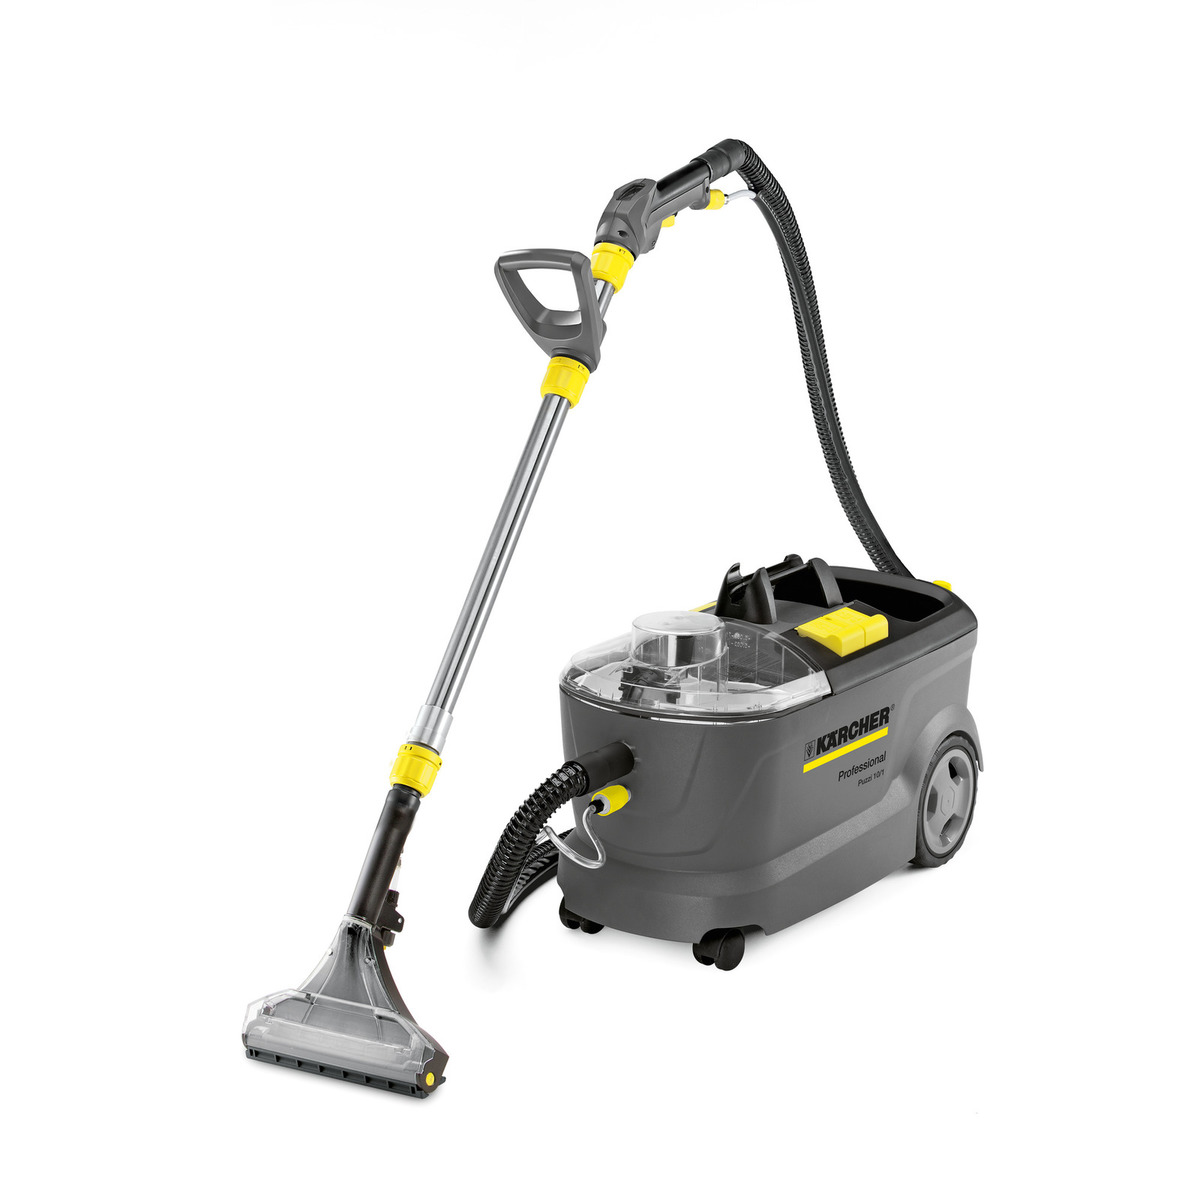 Karcher Puzzi 10/1 Carpet & Upholstery Cleaner